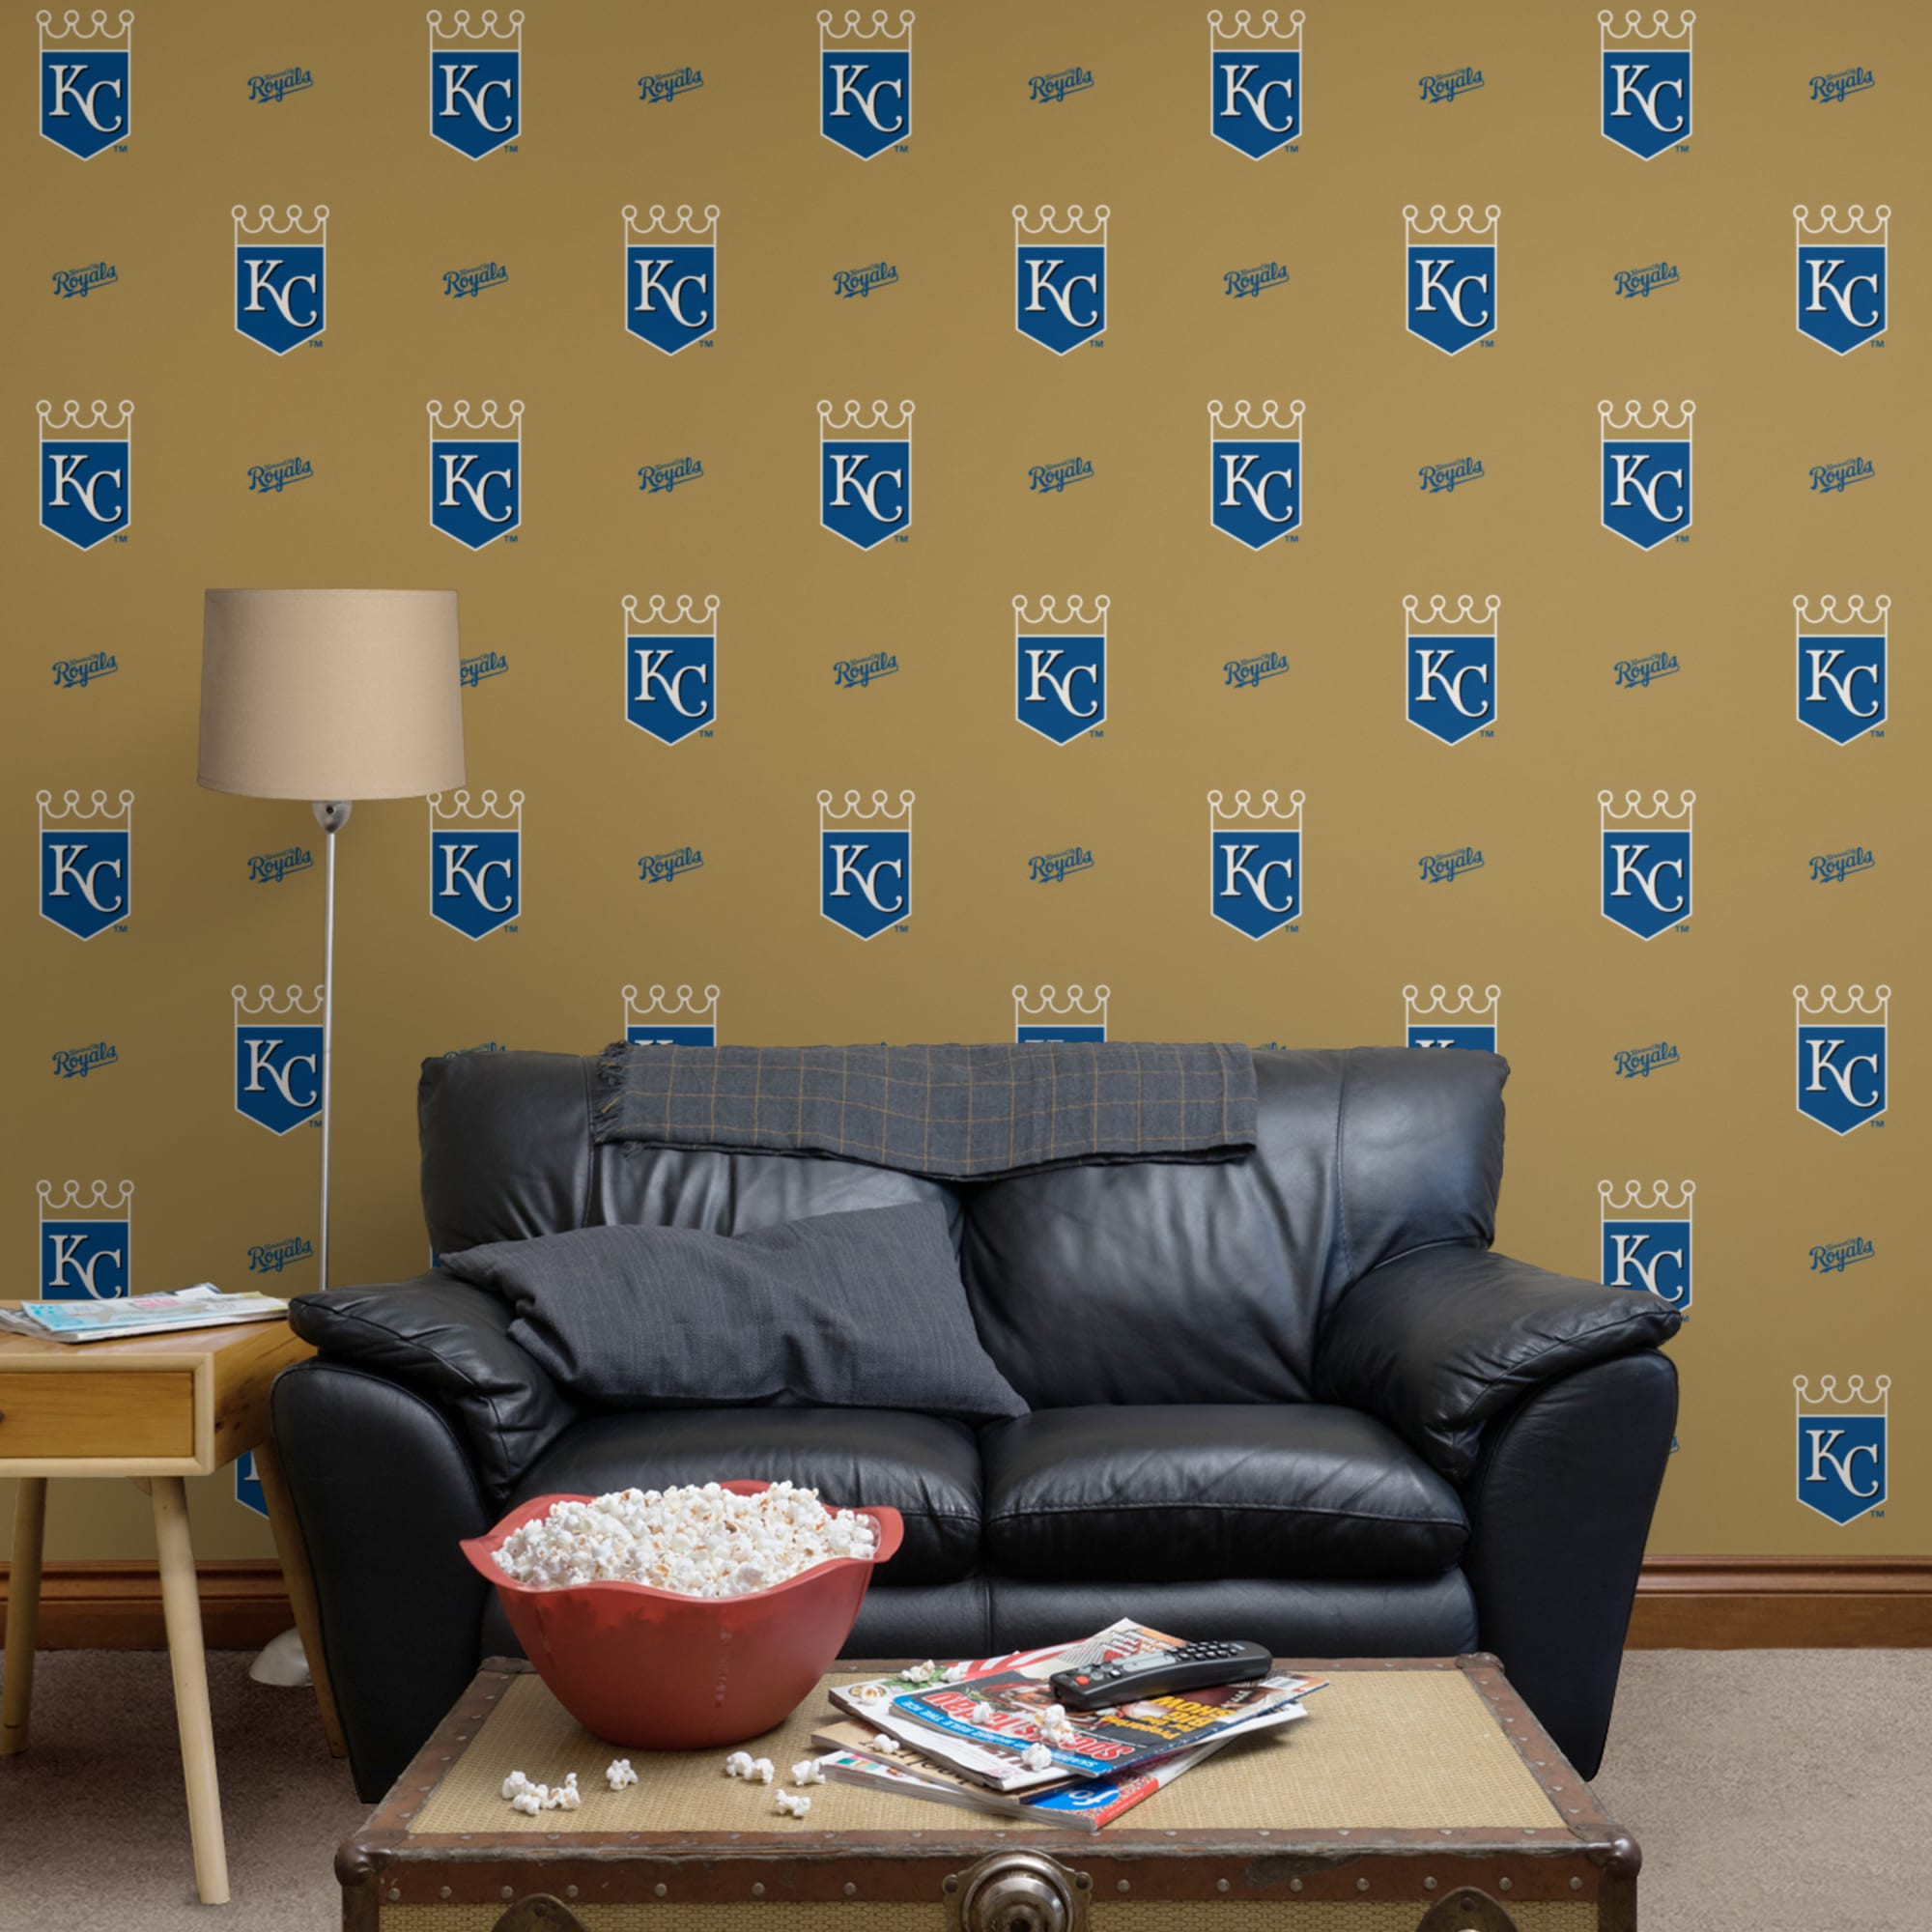 Kansas City Royals: Logo Pattern - Officially Licensed Removable Wallpaper 12" x 12" Sample by Fathead | 100% Vinyl